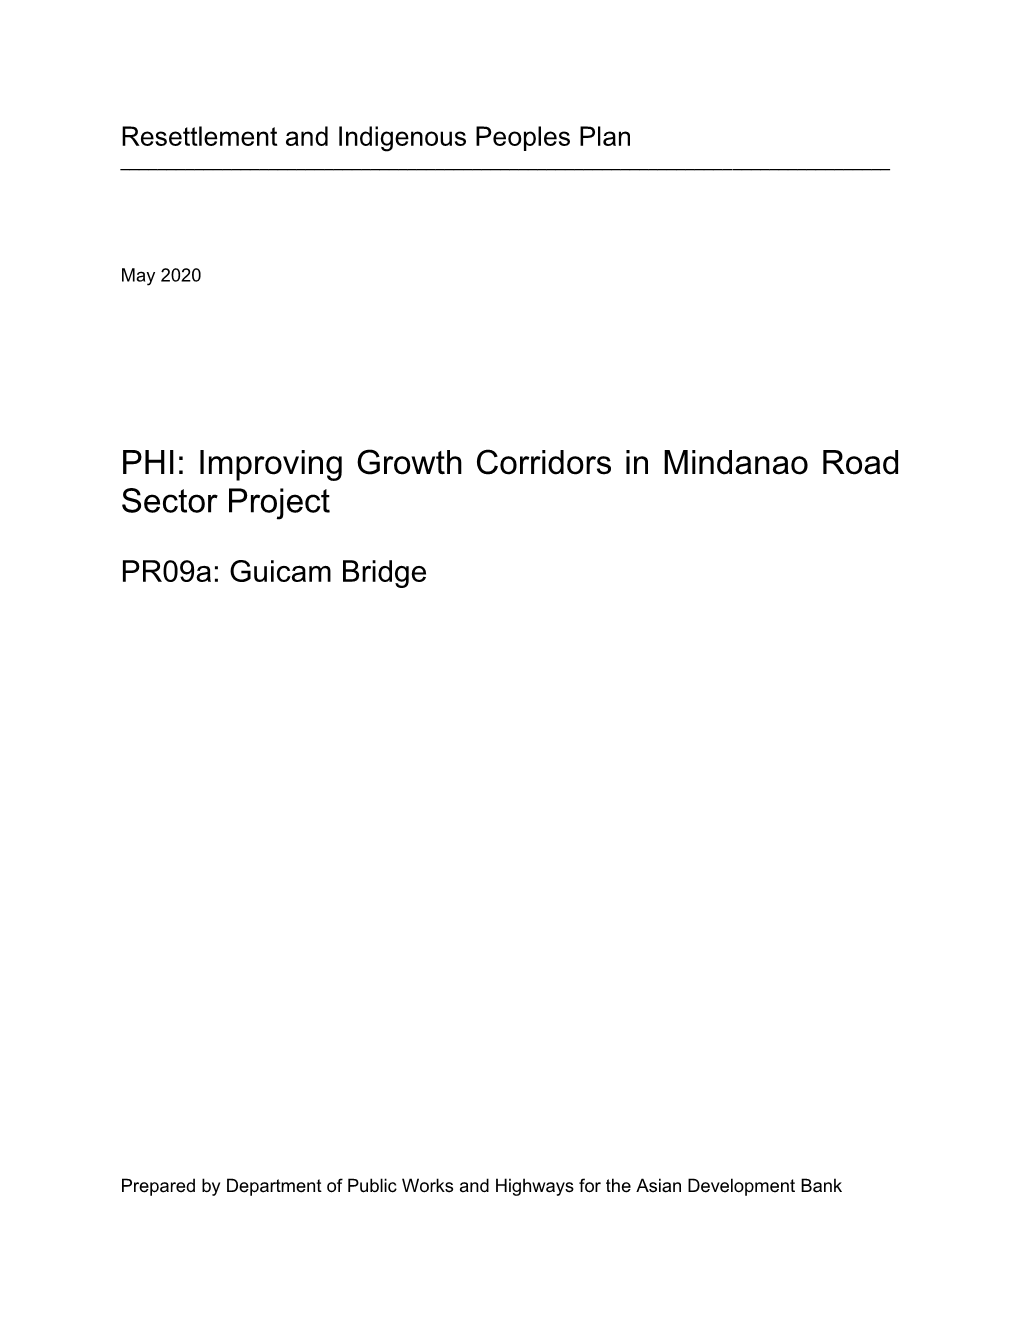 PHI: Improving Growth Corridors in Mindanao Road Sector Project